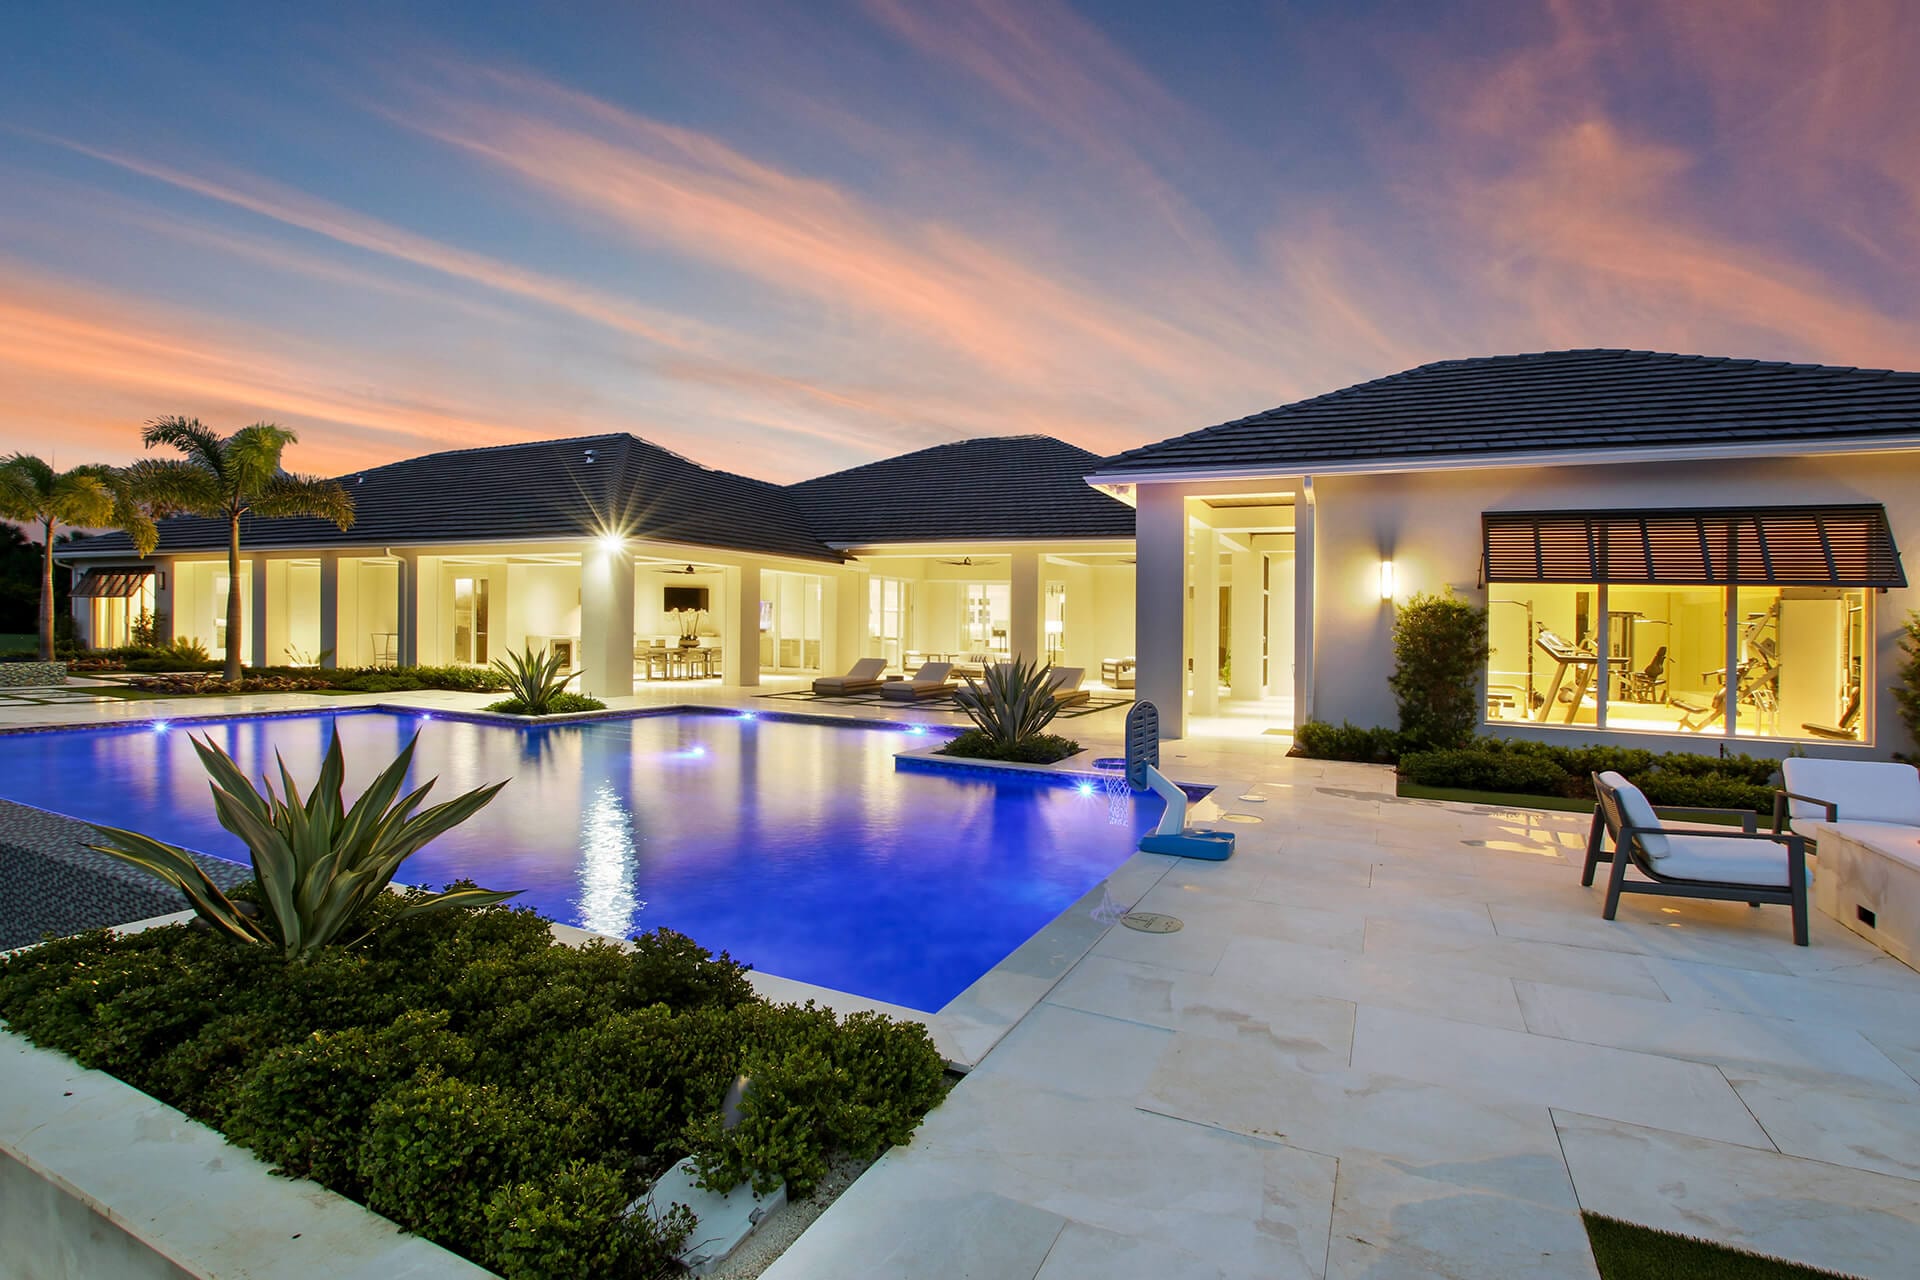 Buyers Are Finding More Space in the Luxury Home Market in Fort Lauderdale